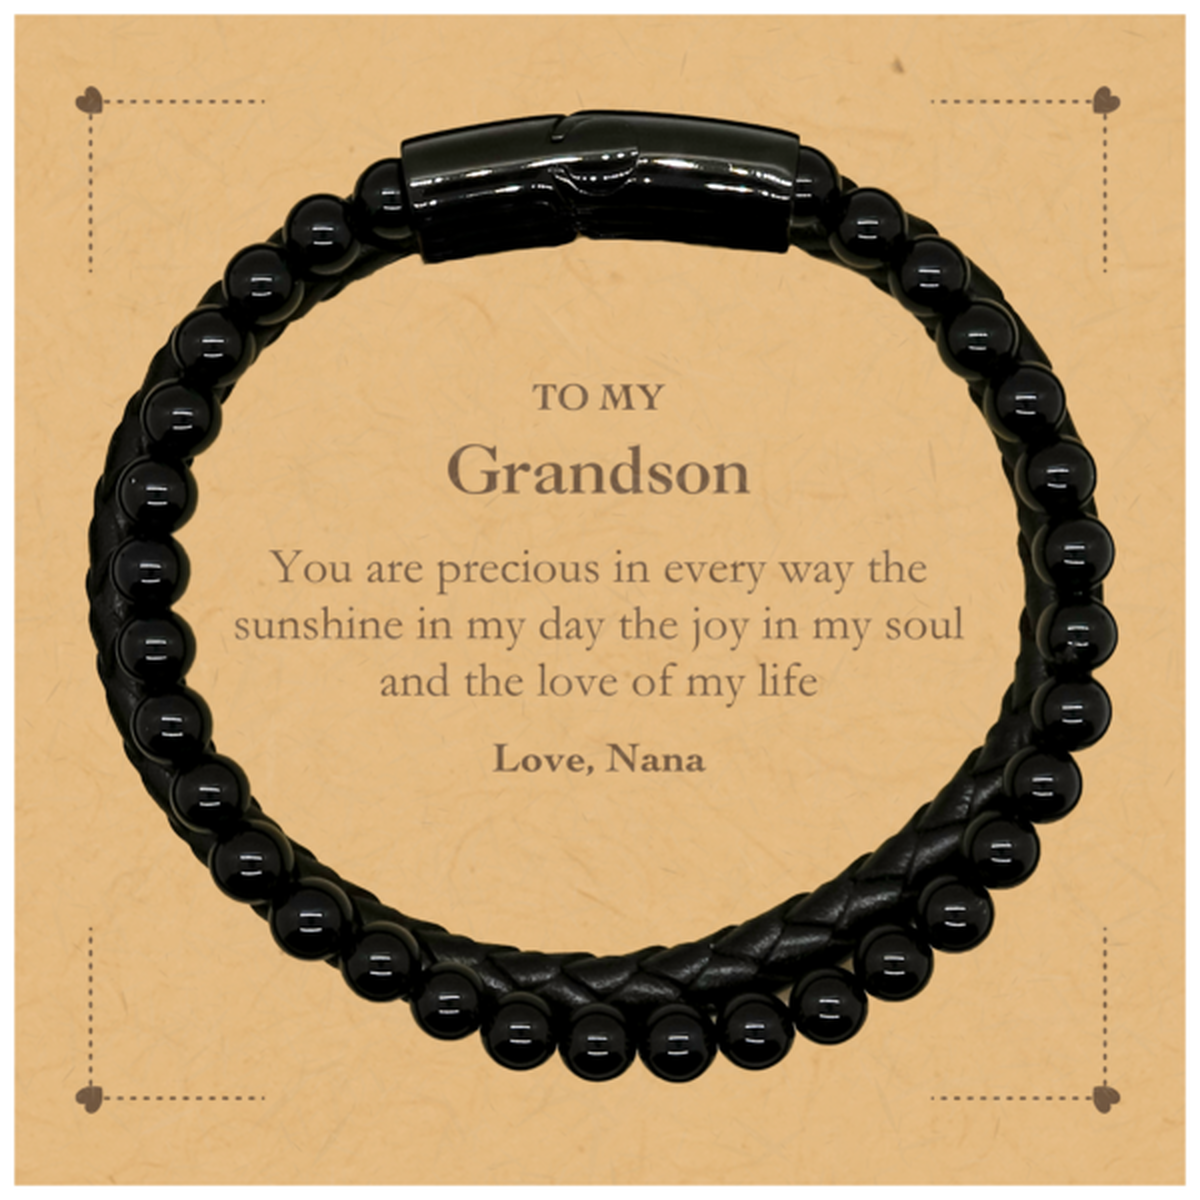 Graduation Gifts for Grandson Stone Leather Bracelets Present from Nana, Christmas Grandson Birthday Gifts Grandson You are precious in every way the sunshine in my day. Love, Nana